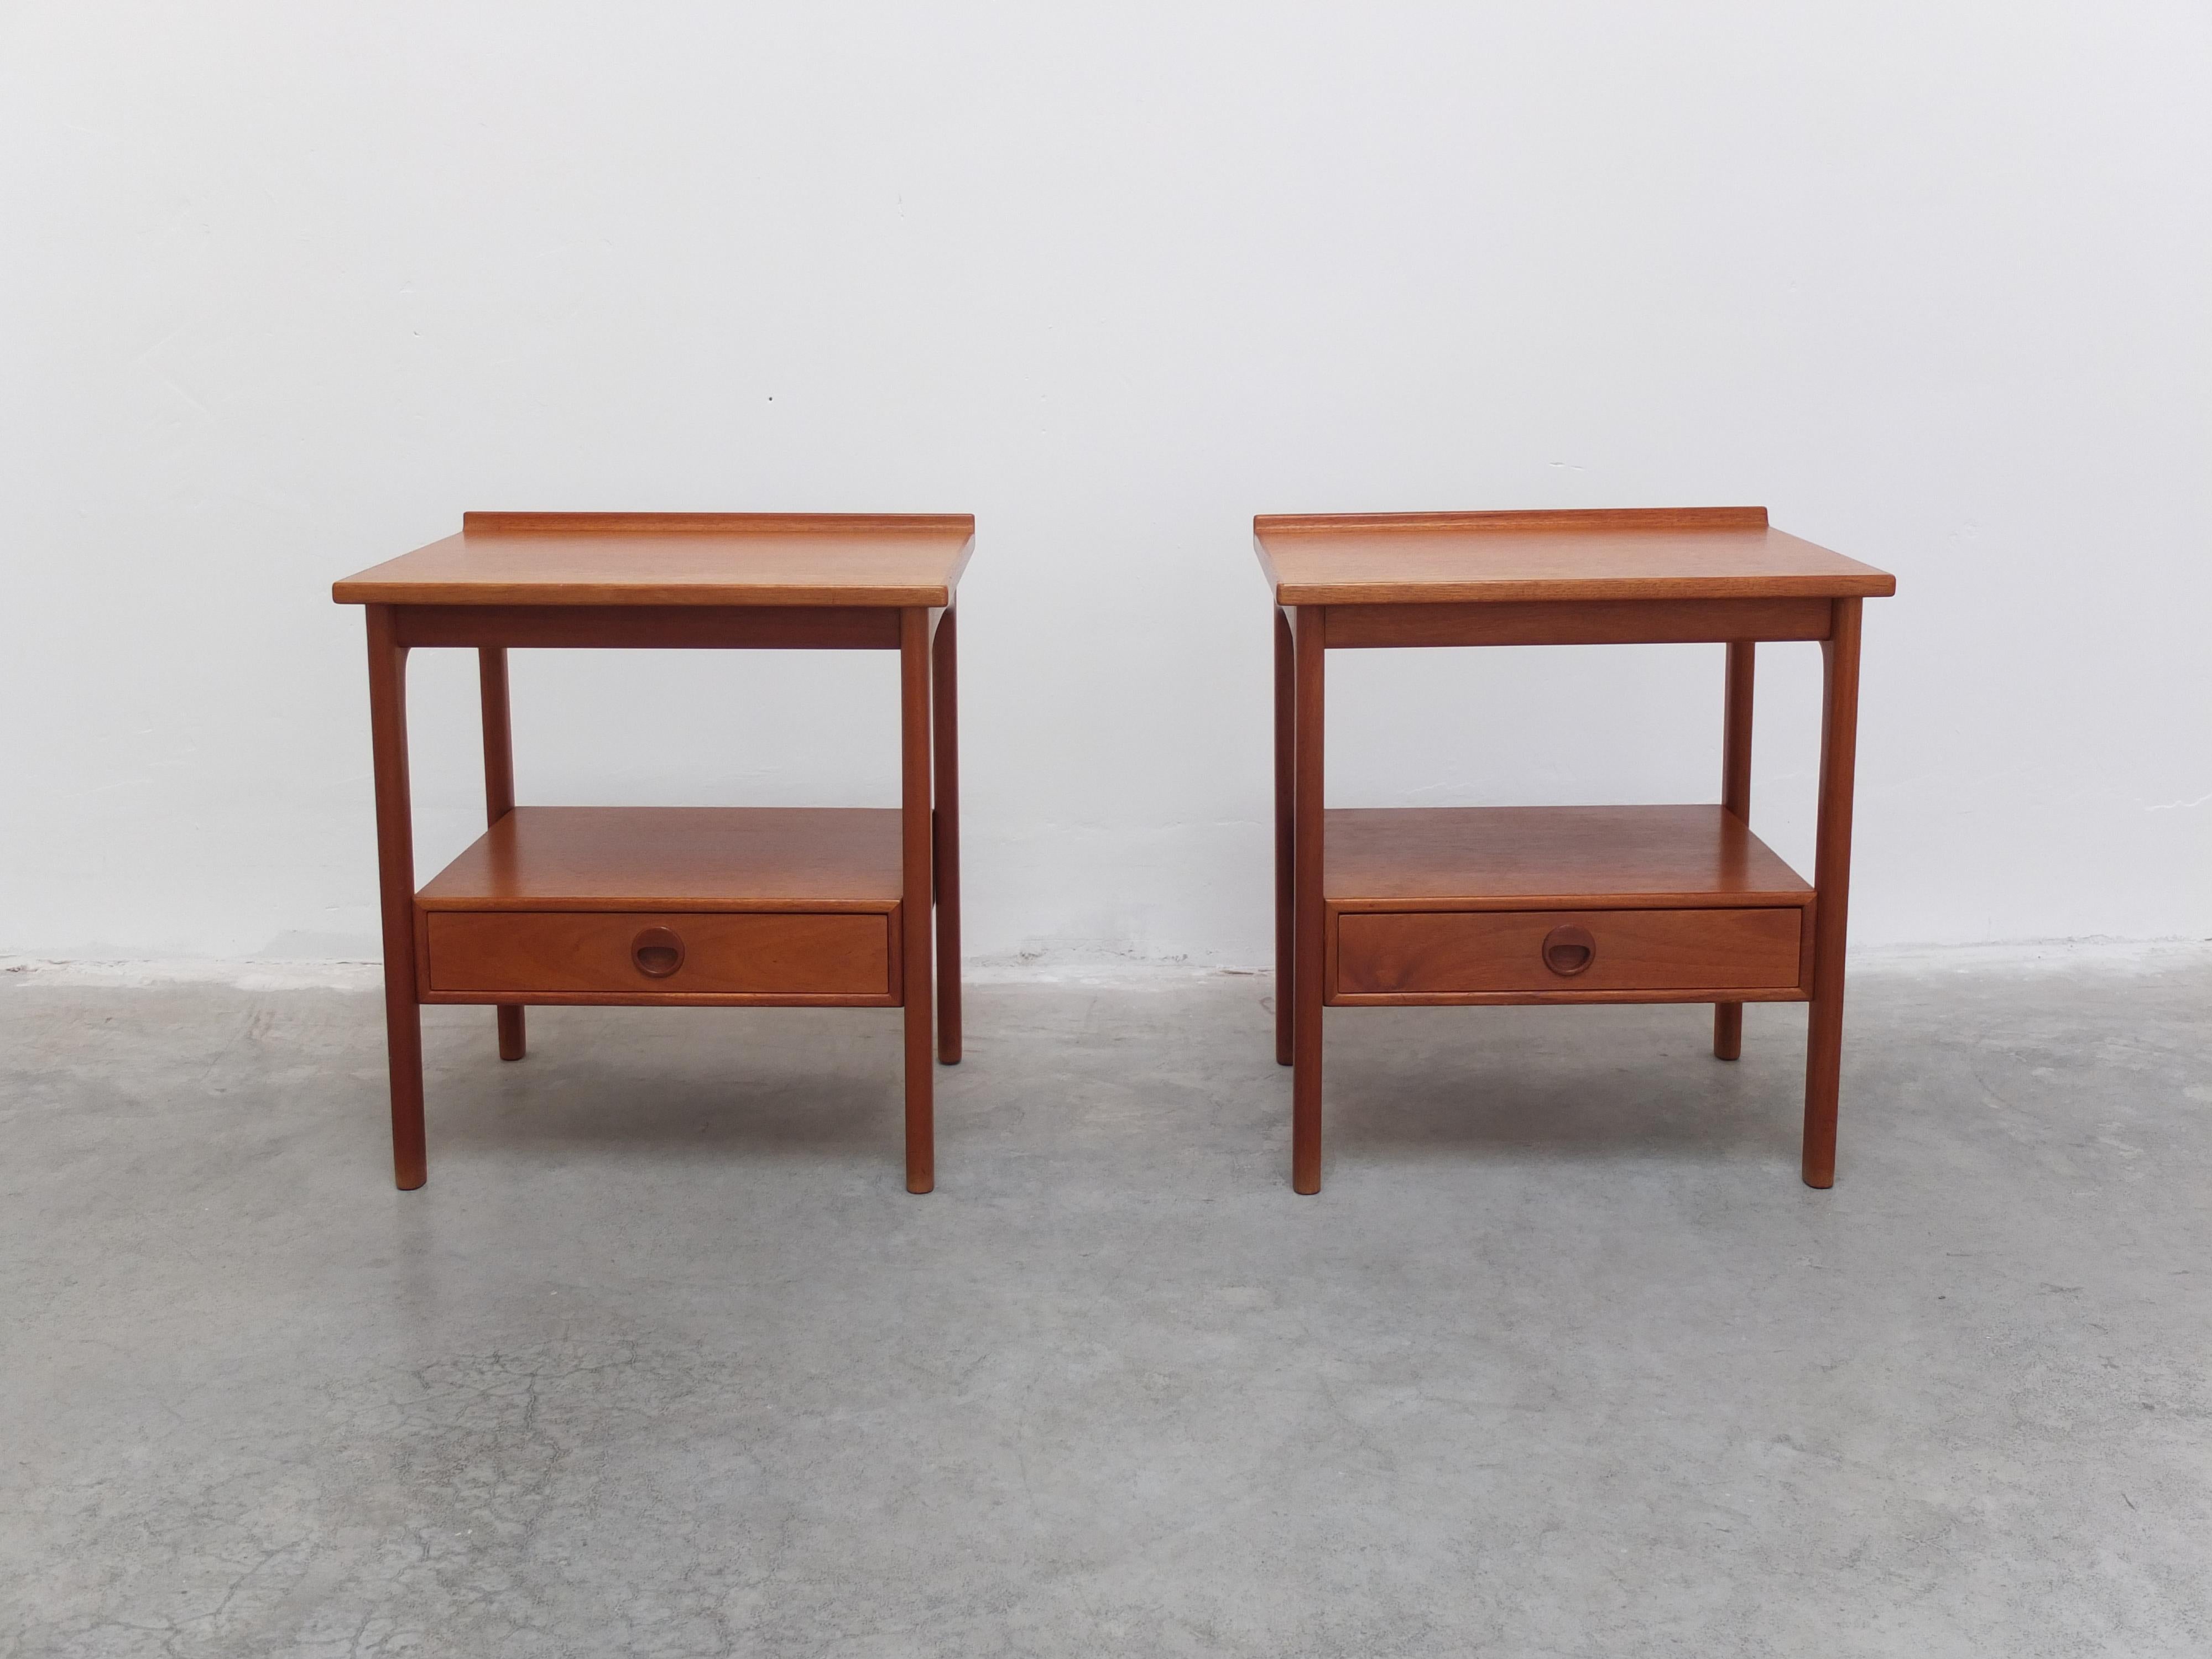 Wonderful pair of ‘Frisco’ side tables designed by Folke Ohlsson for Tingstrøms during the 1960s. They are made of solid teak and have a very high level of finishing with a raised edge on top and one drawer underneath. Can be used freestanding or